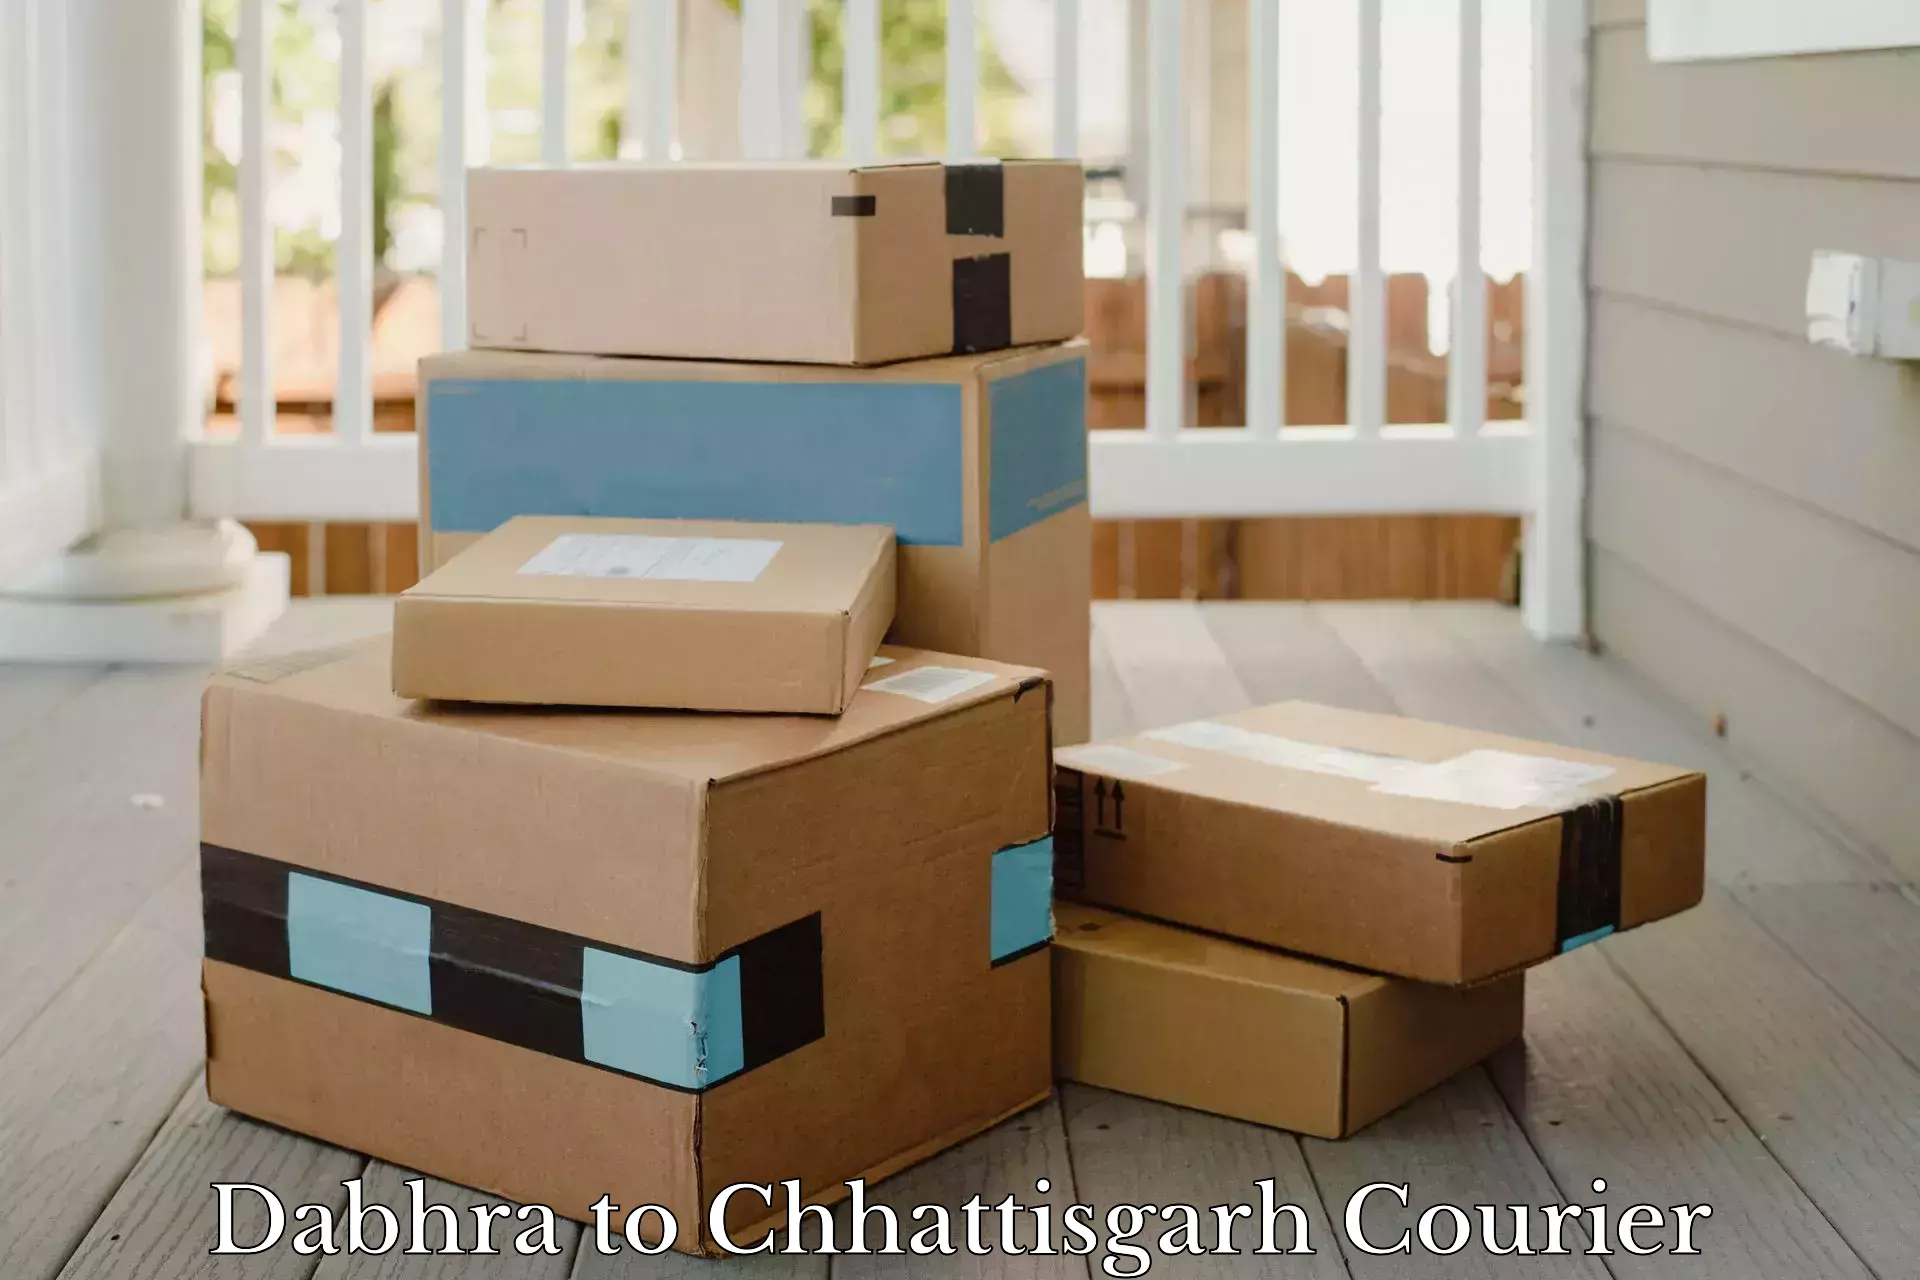 User-friendly delivery service in Dabhra to Raigarh